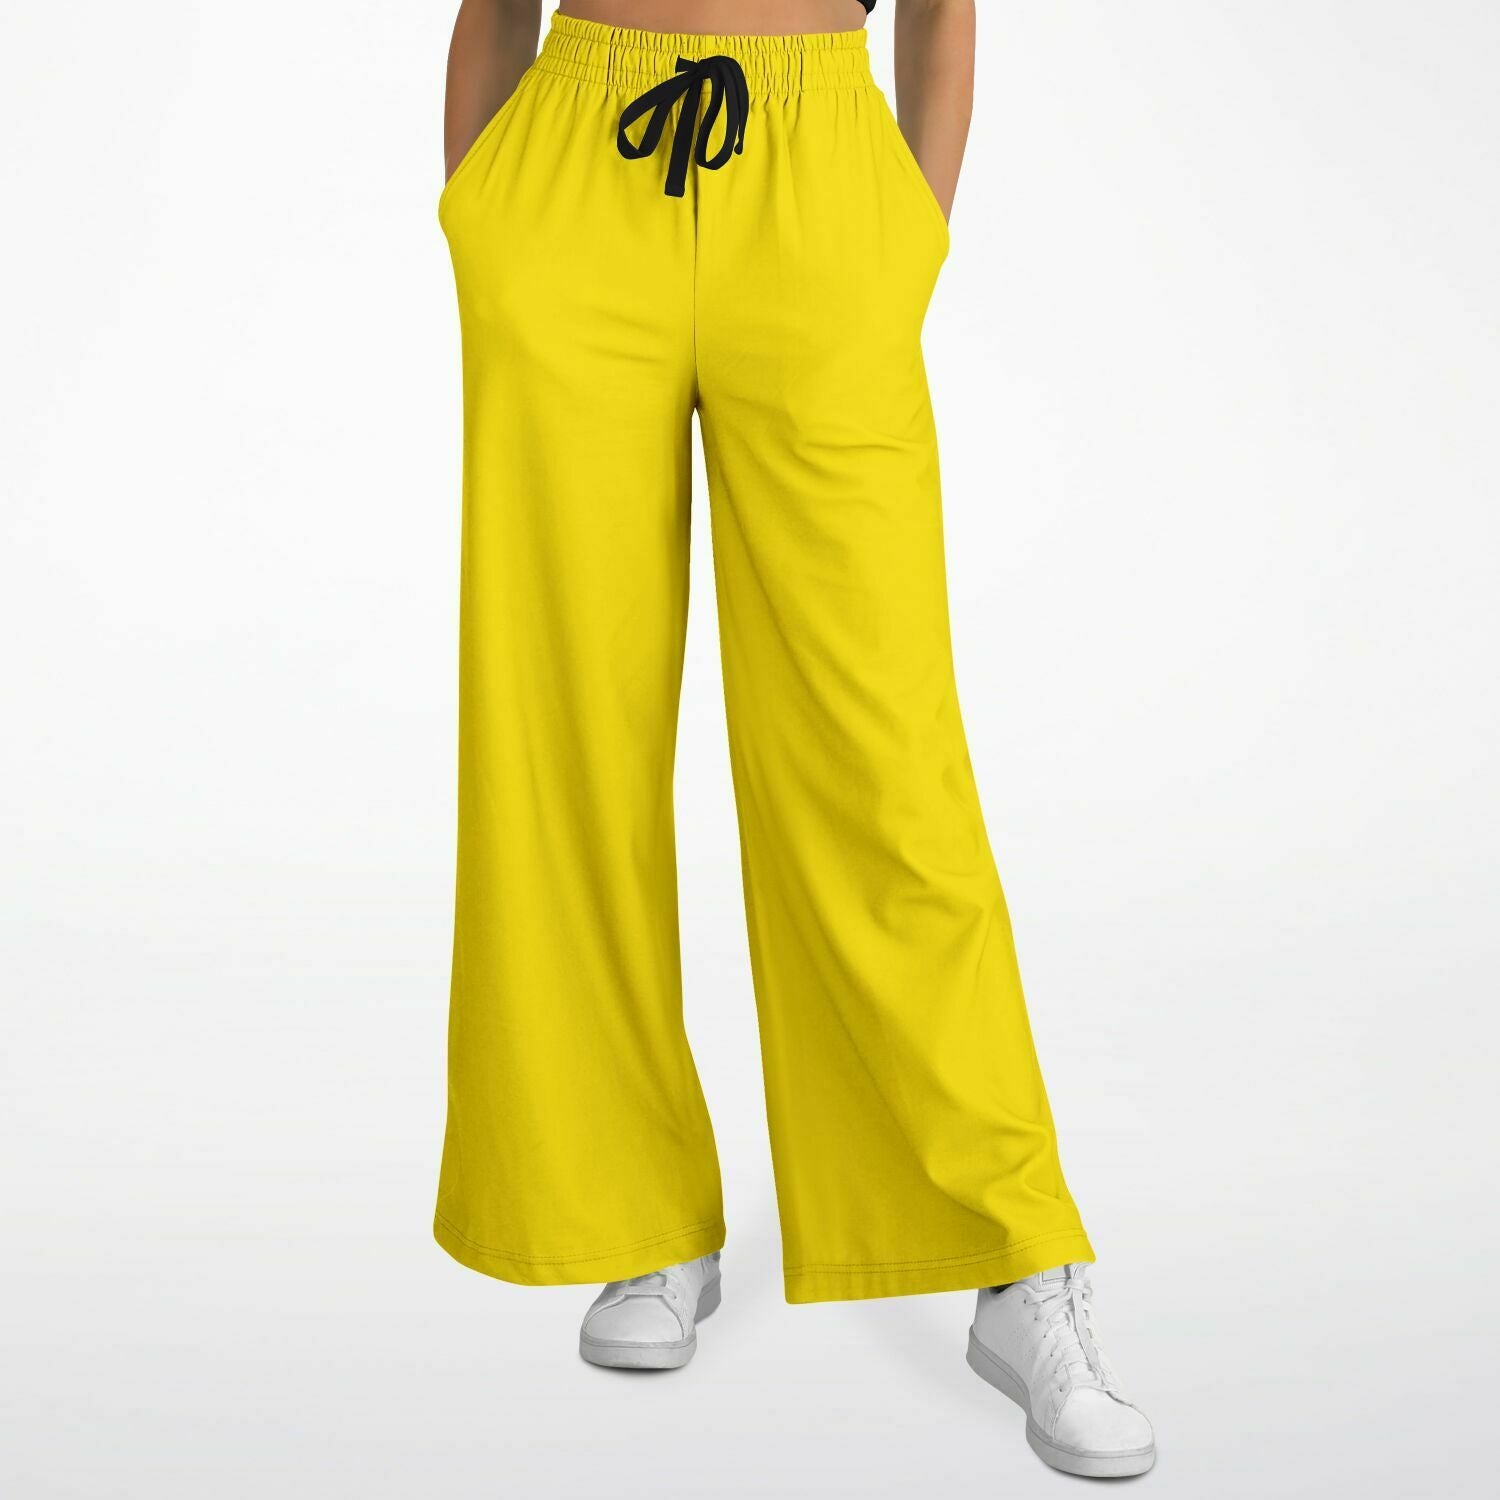 Yellow Pants for Party Professionals